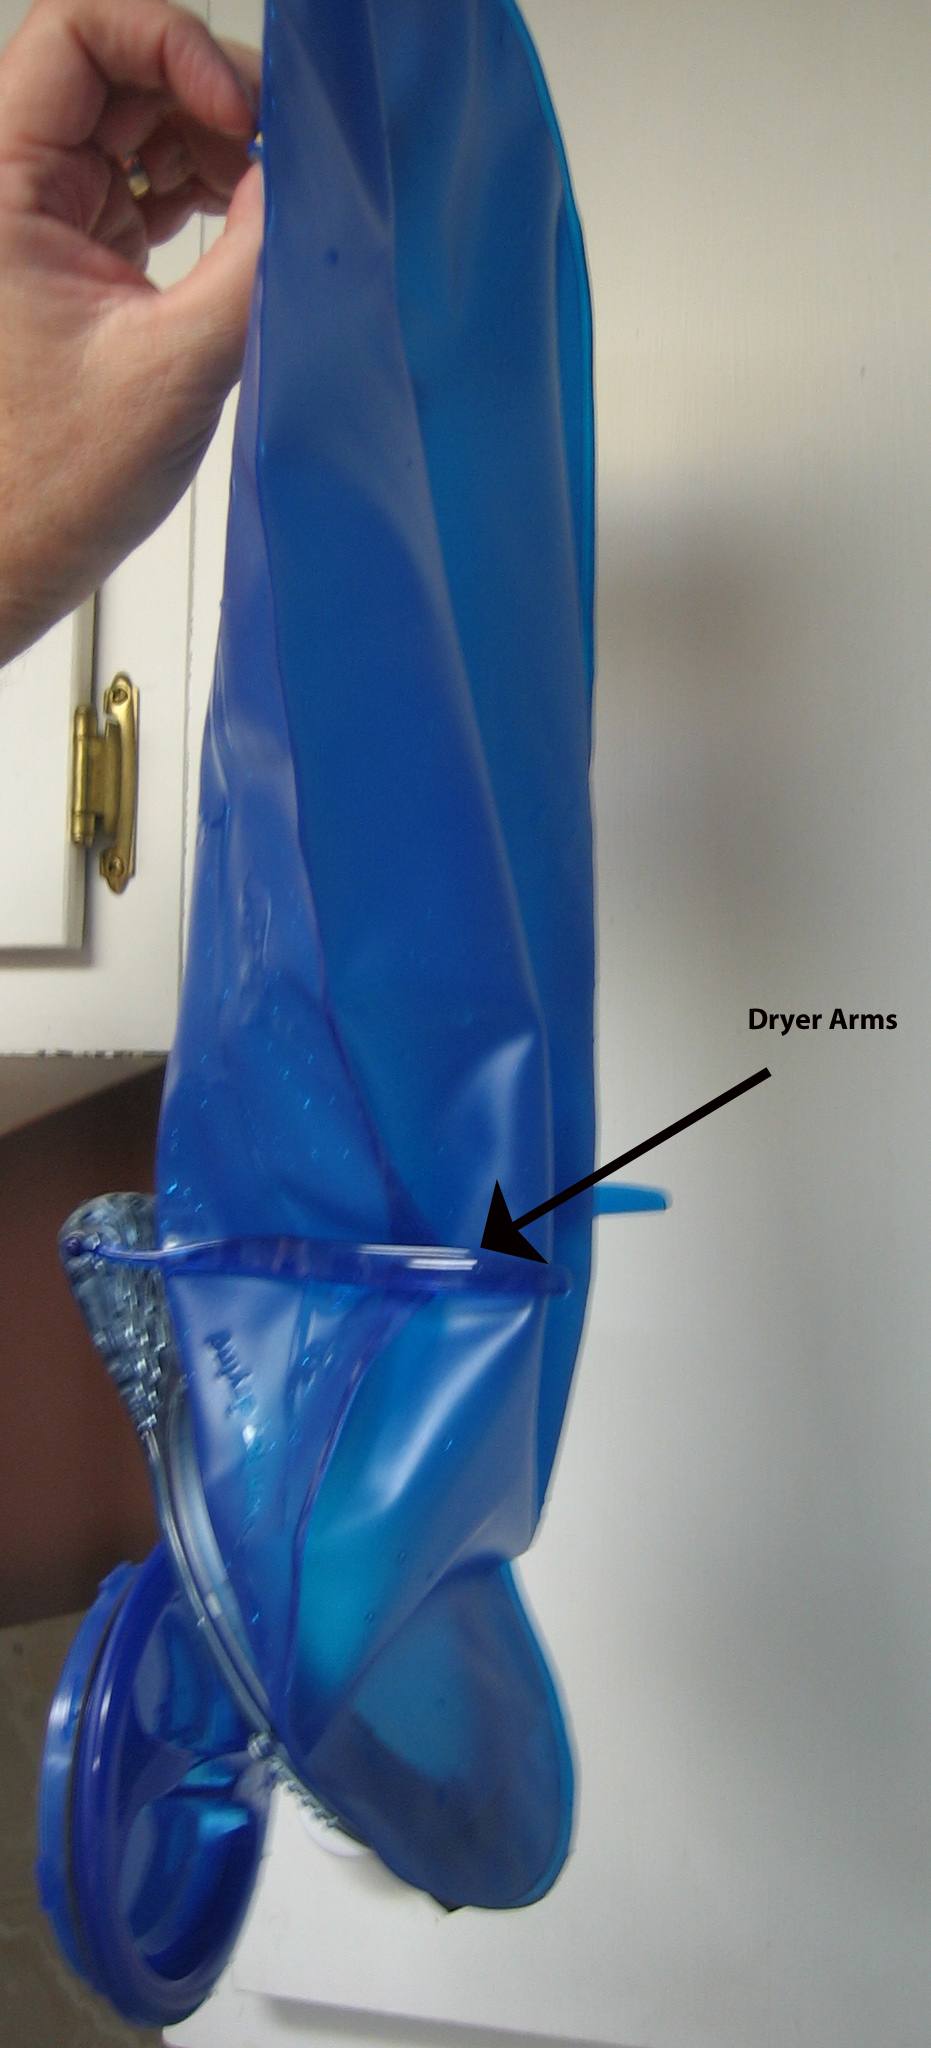 Dryer arms